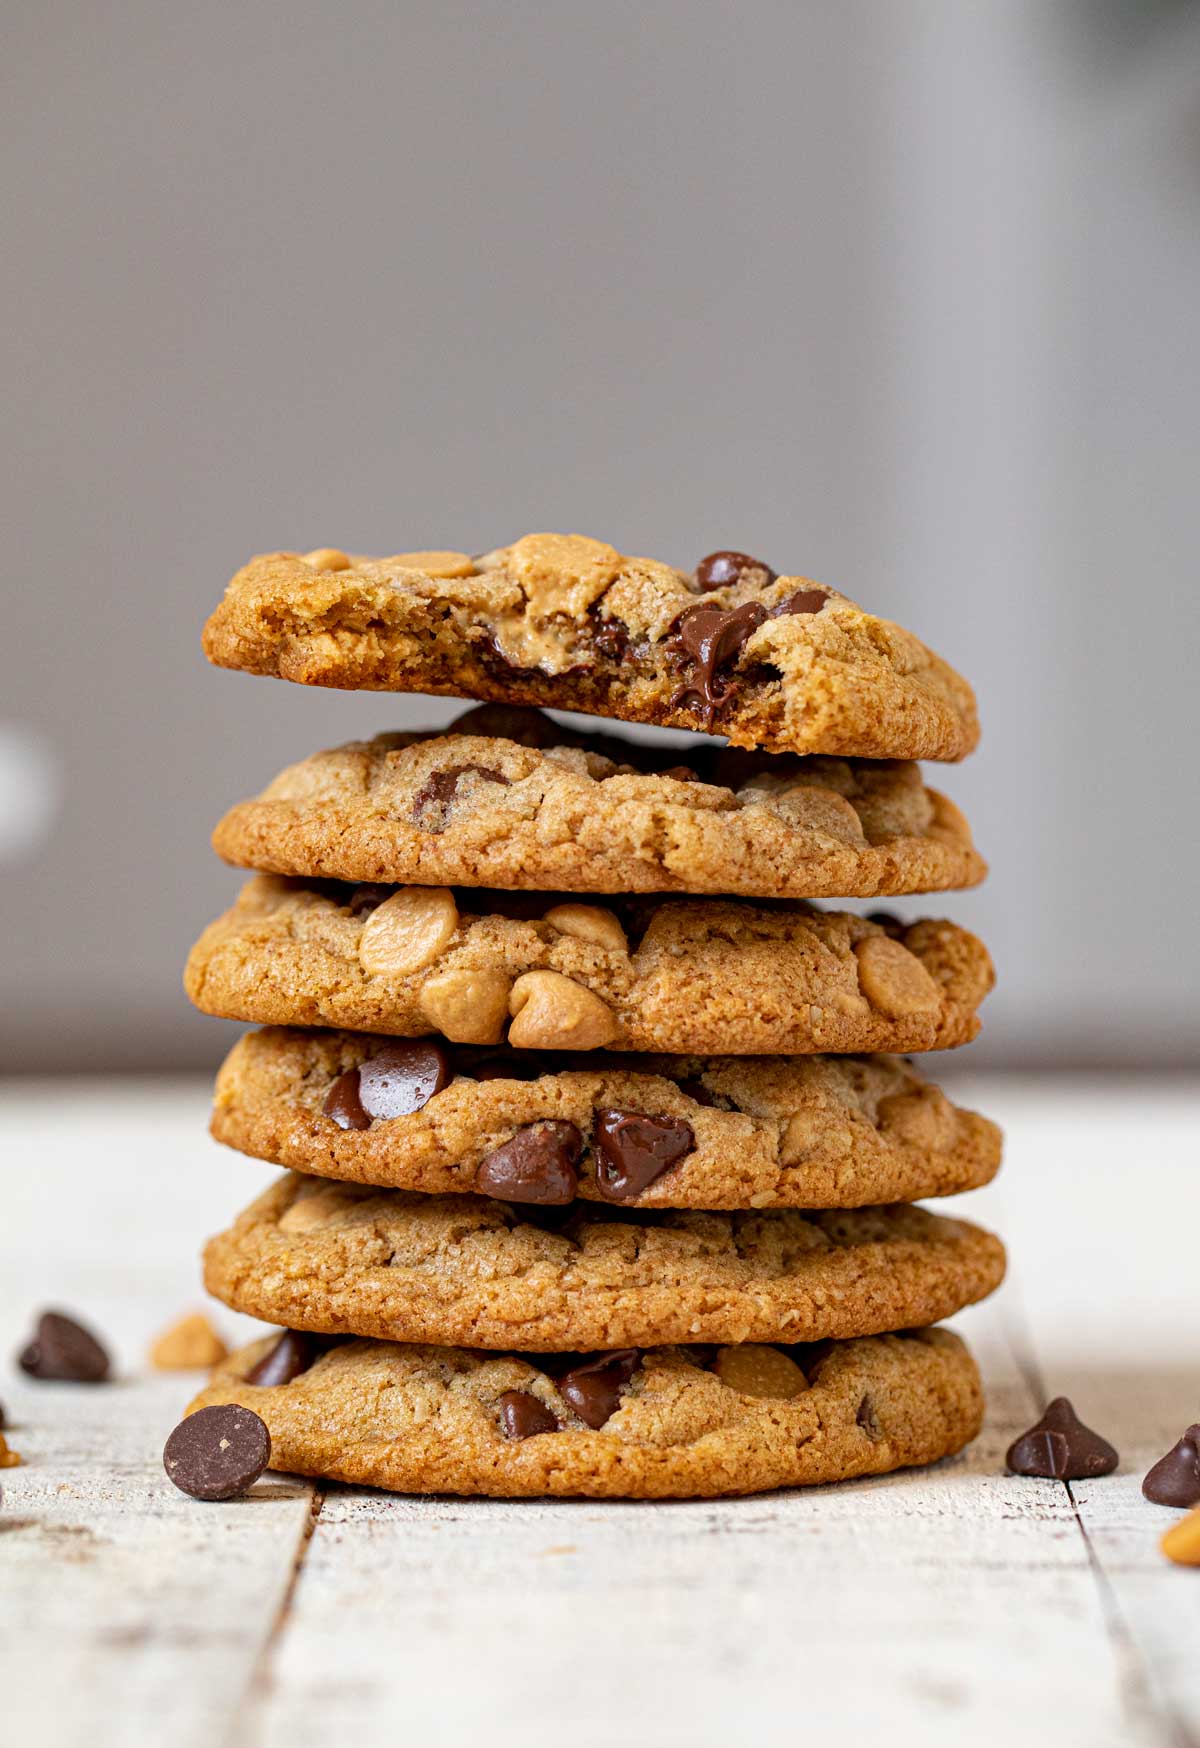 Healthy Chocolate Peanut Butter Chip Cookies - Cooking Made Healthy